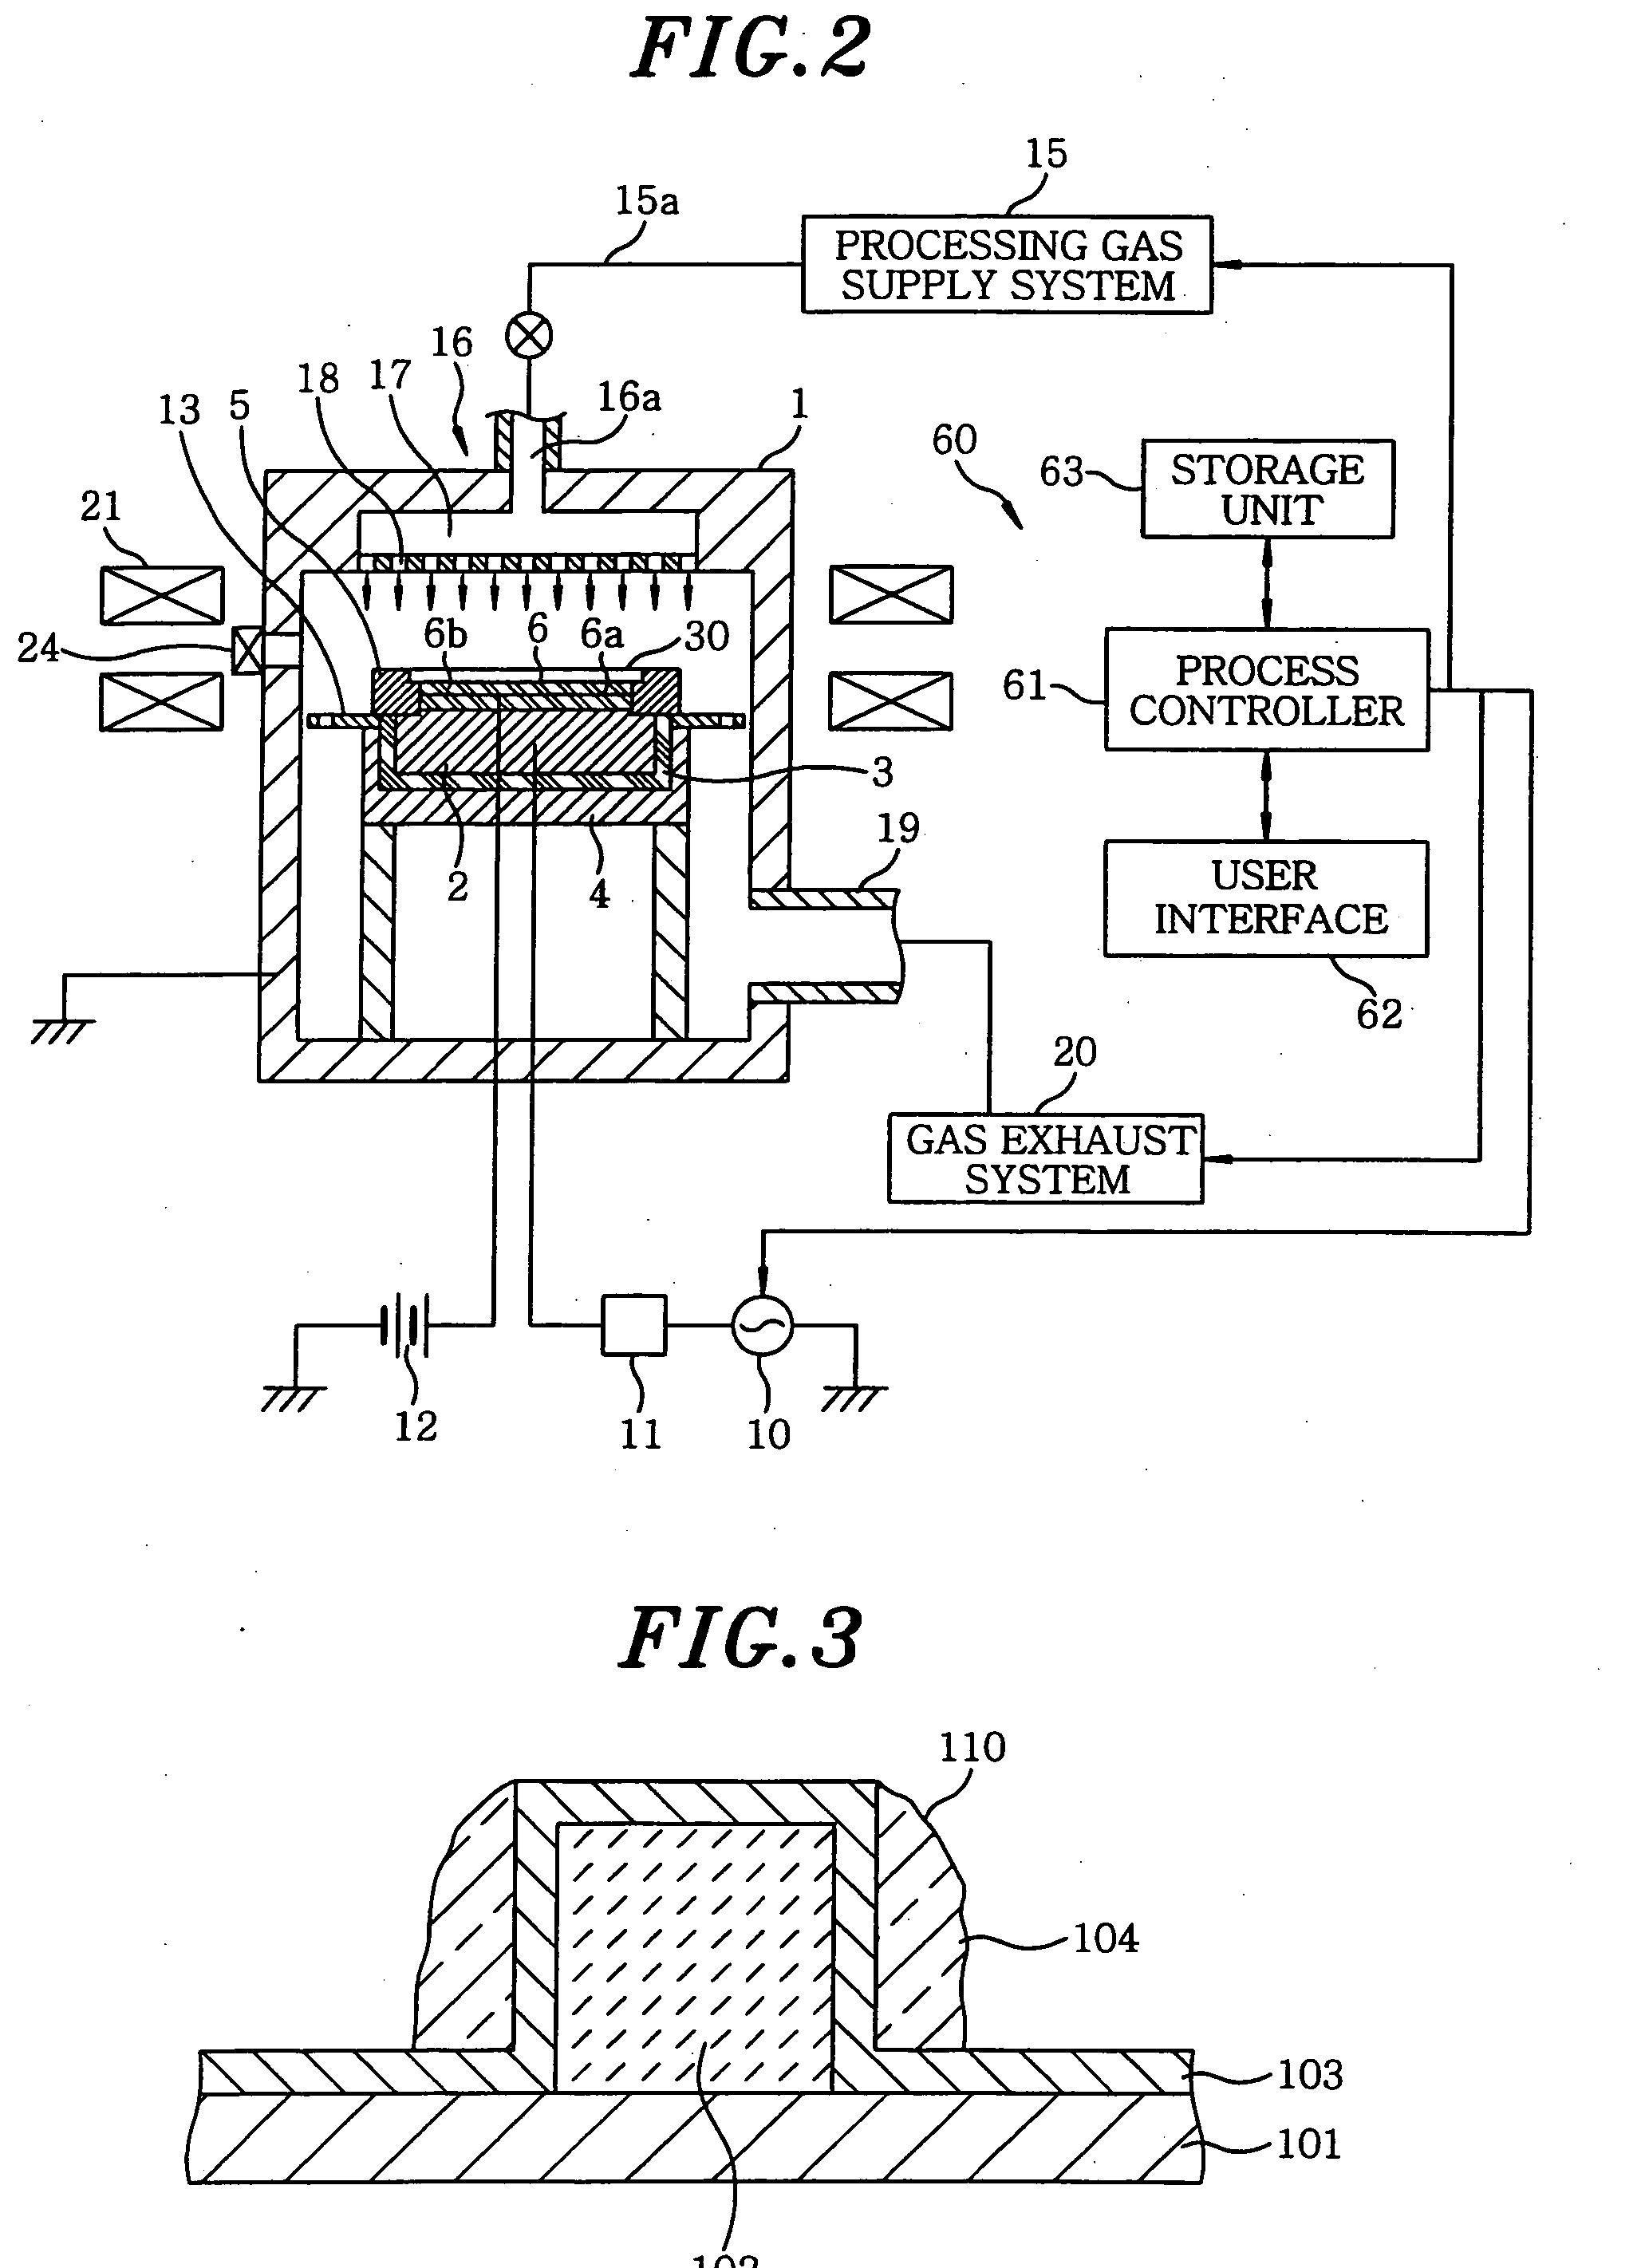 Method and apparatus for manufacturing a semiconductor device, control program thereof and computer-readable storage medium storing the control program